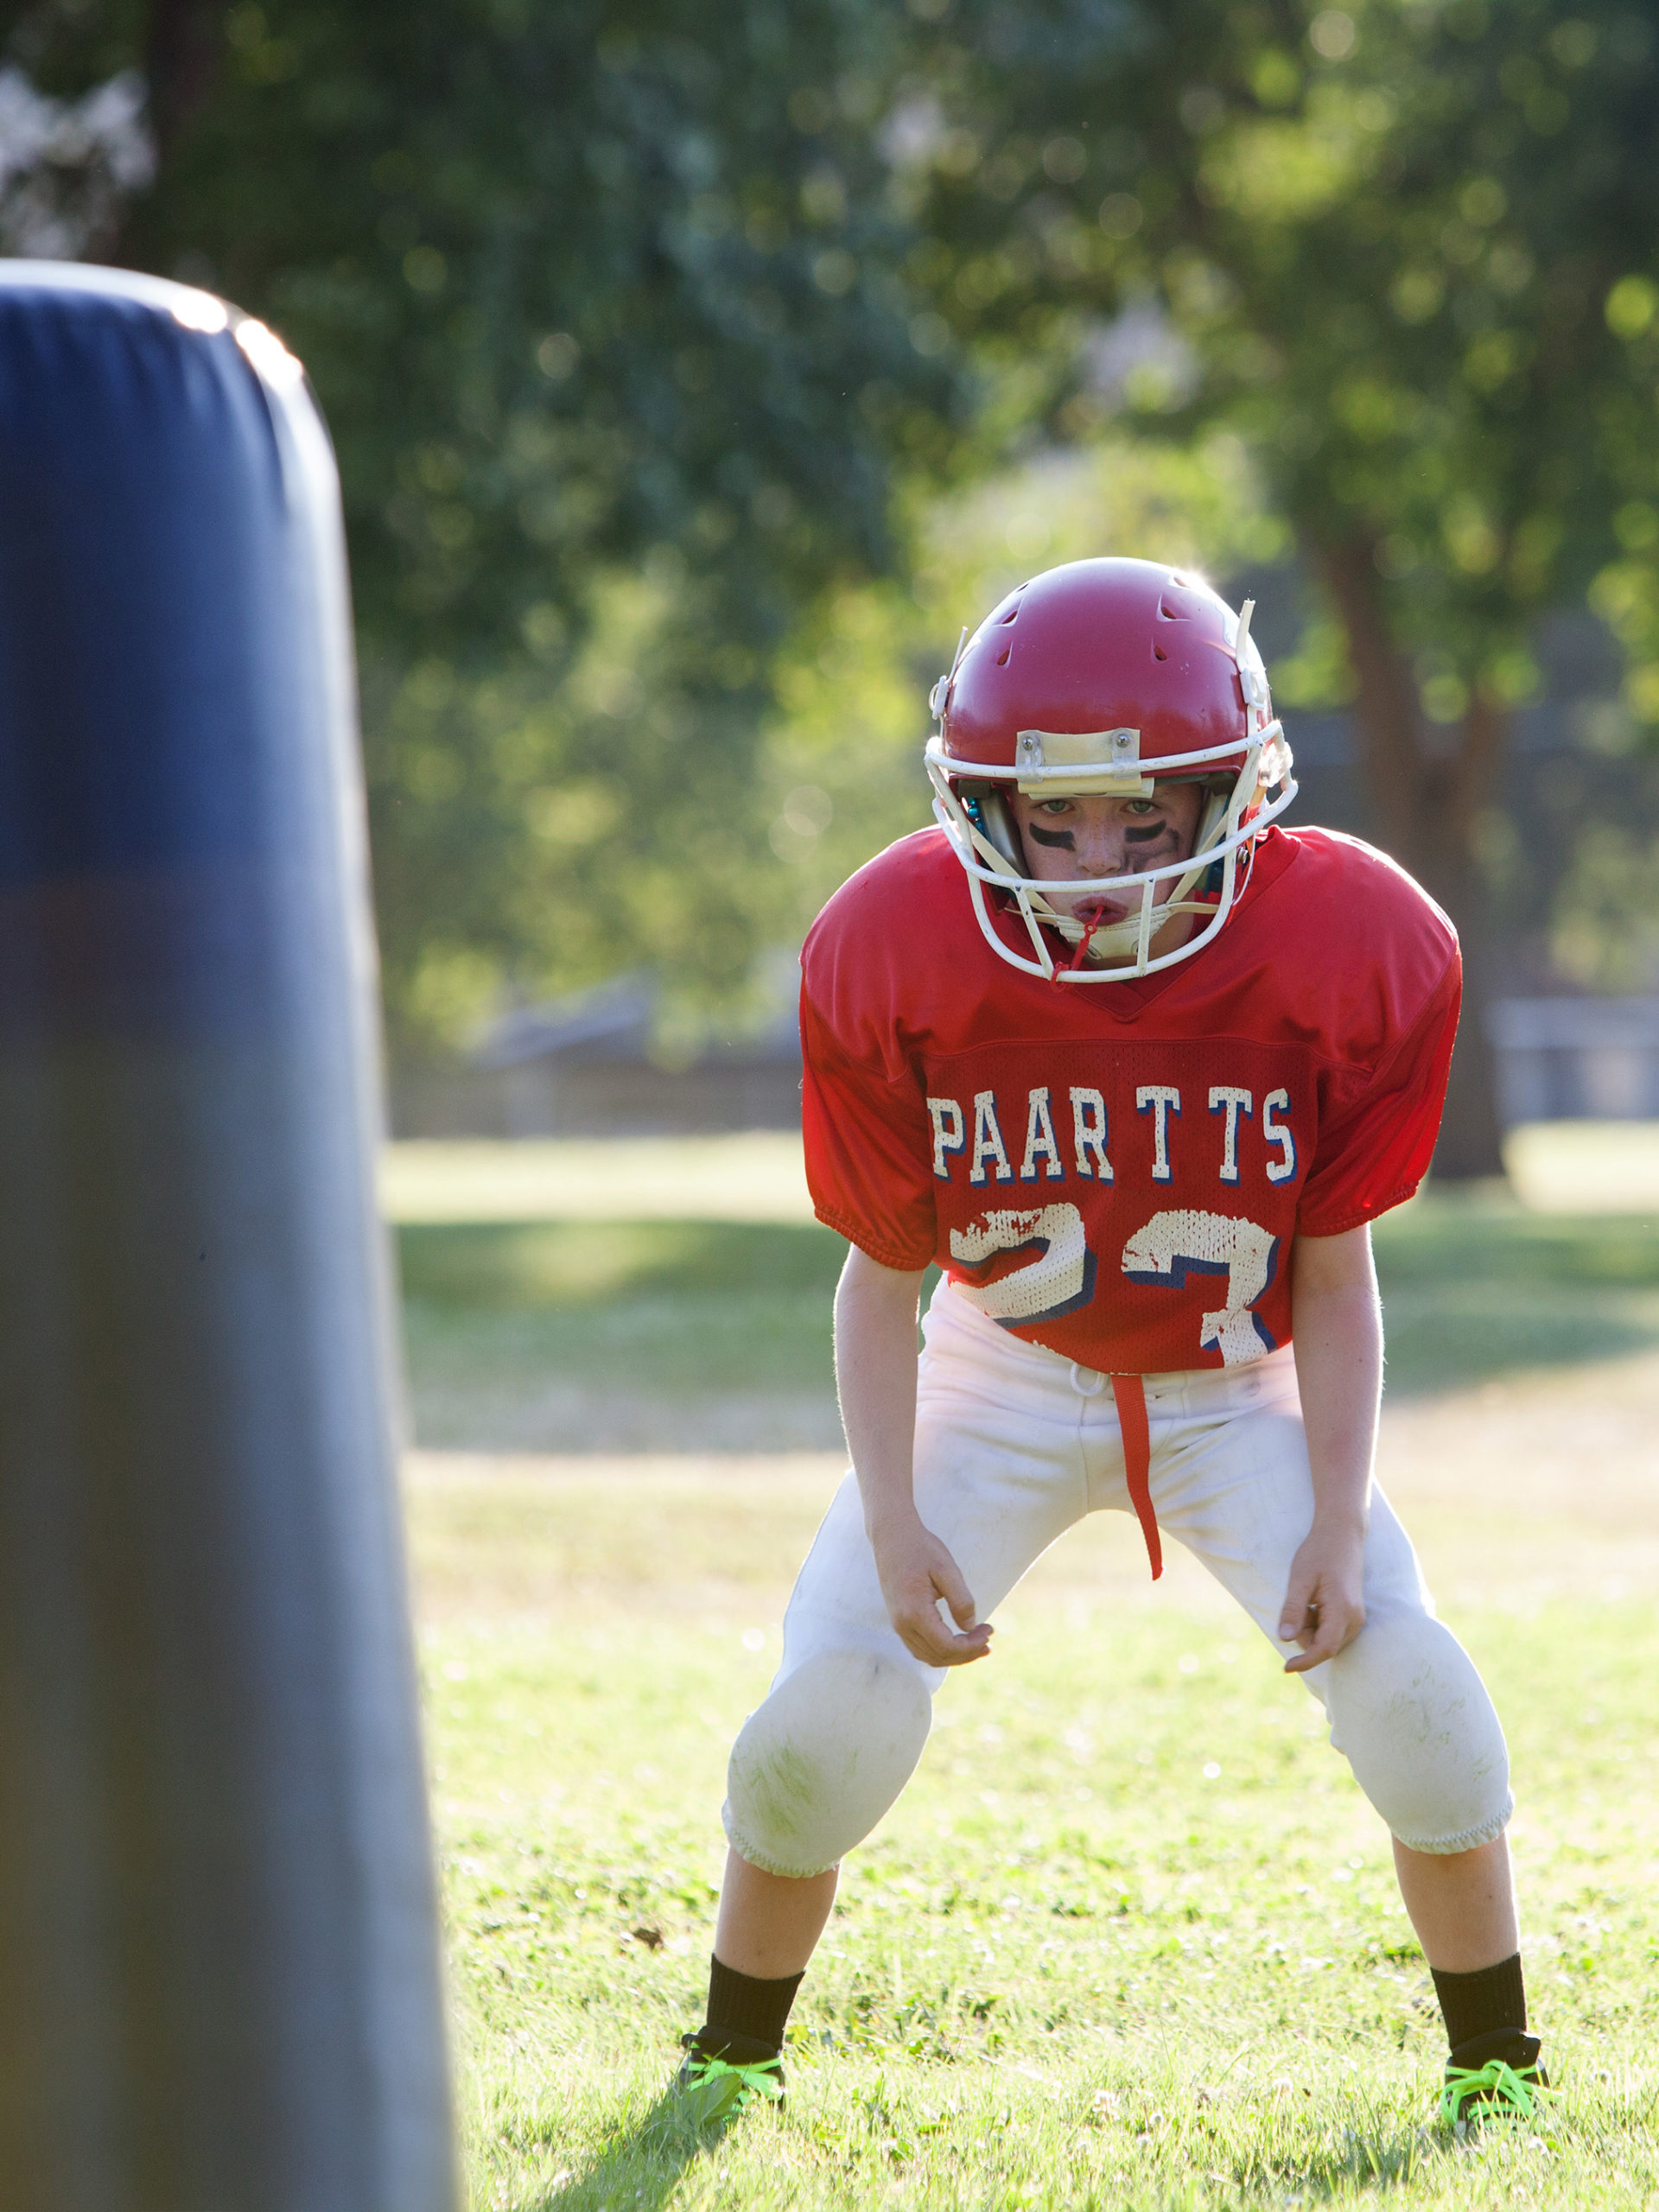 Youth football player preparing to make a tackle